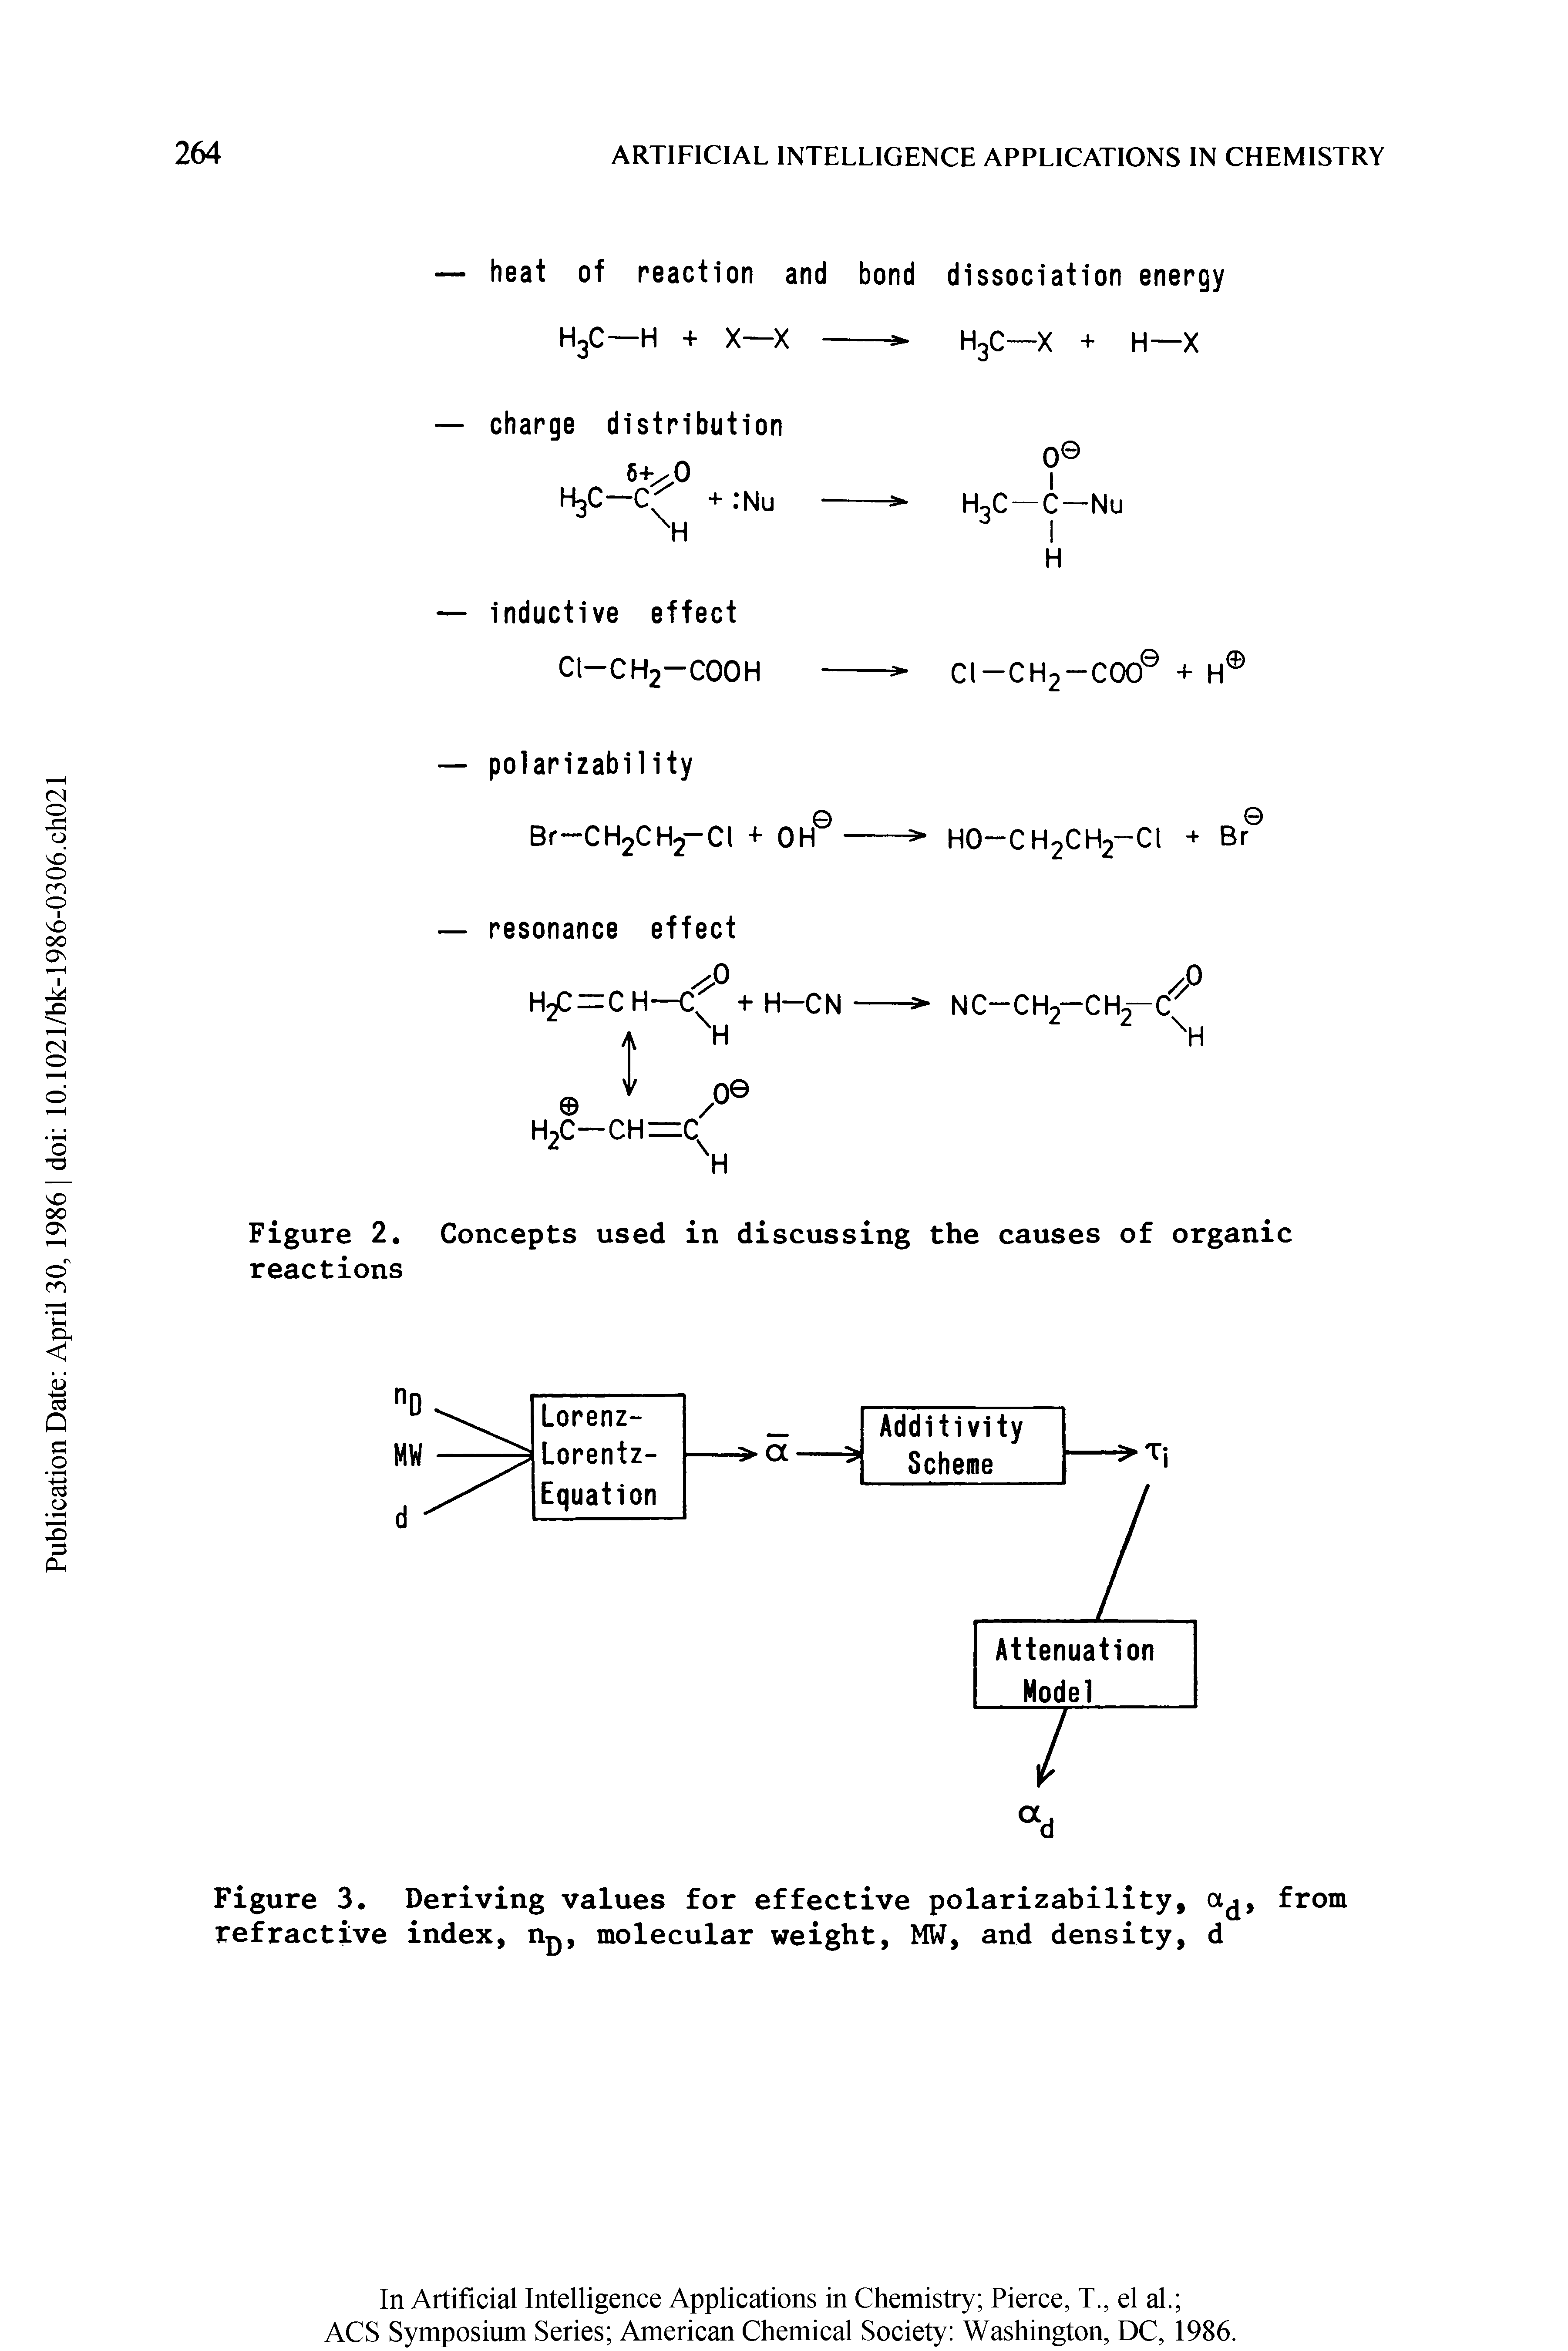 Figure 3. Deriving values for effective polarizability, a, from refractive index, n, molecular weight, MW, and density, d...